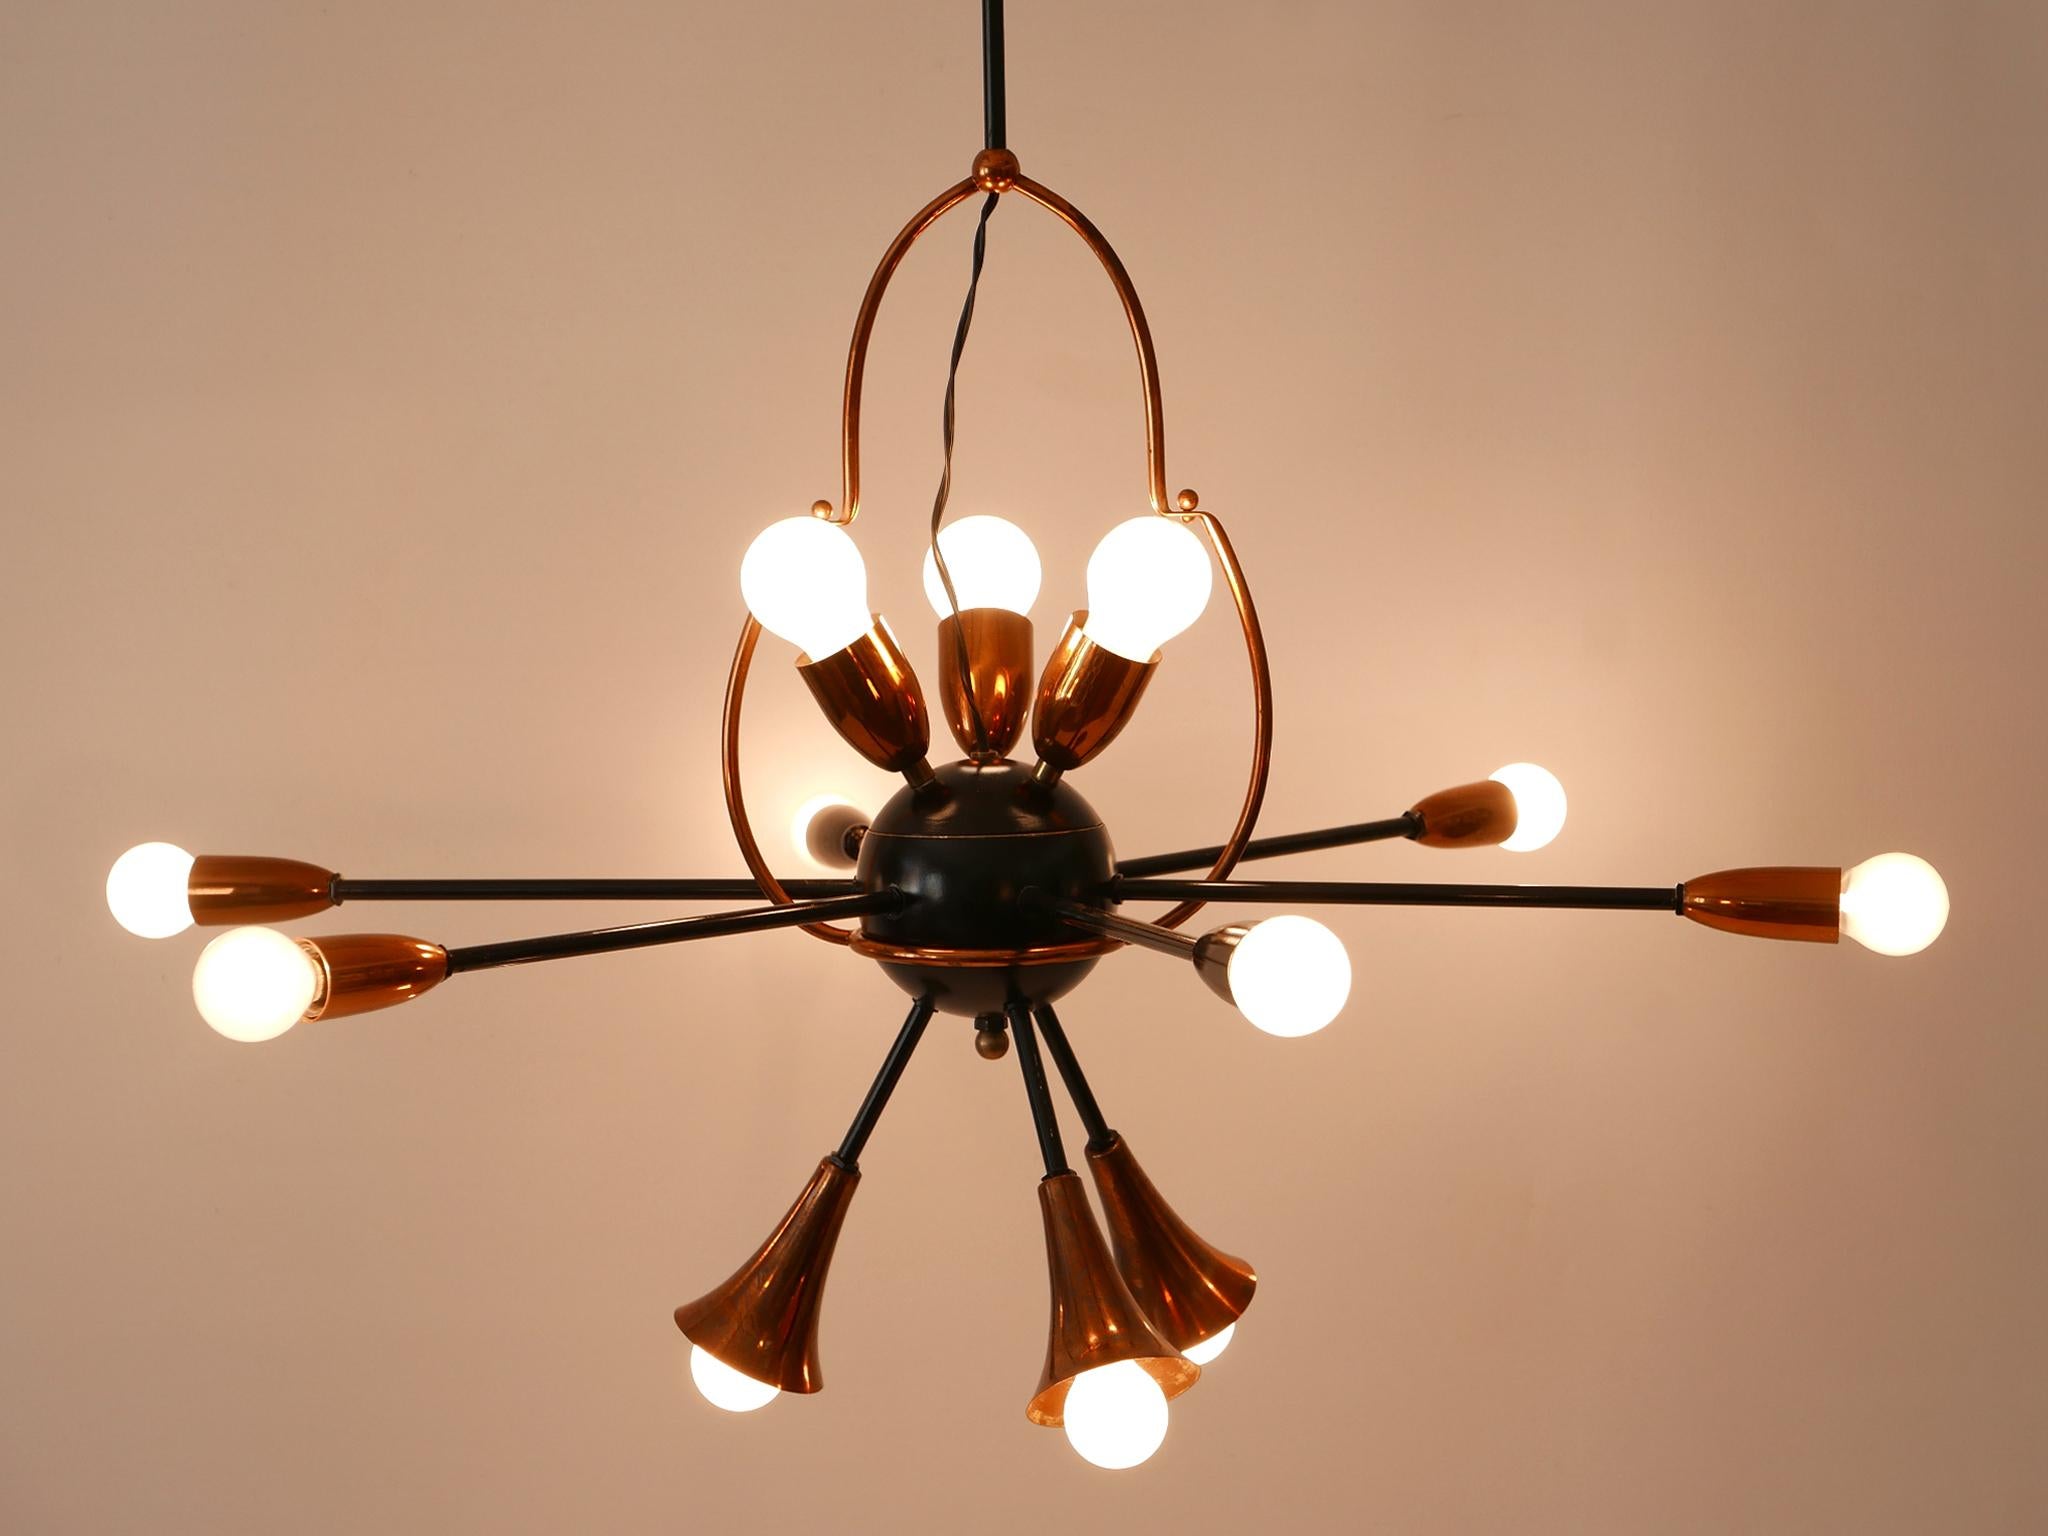 A breath taking design object. Extremely rare, lovely and highly decorative Mid-Century Modern twelve-flamed sputnik pendant lamp or chandelier. Designed and manufactured probably in Austria, 1950s.

Executed in copper, brass and metal, the pendant